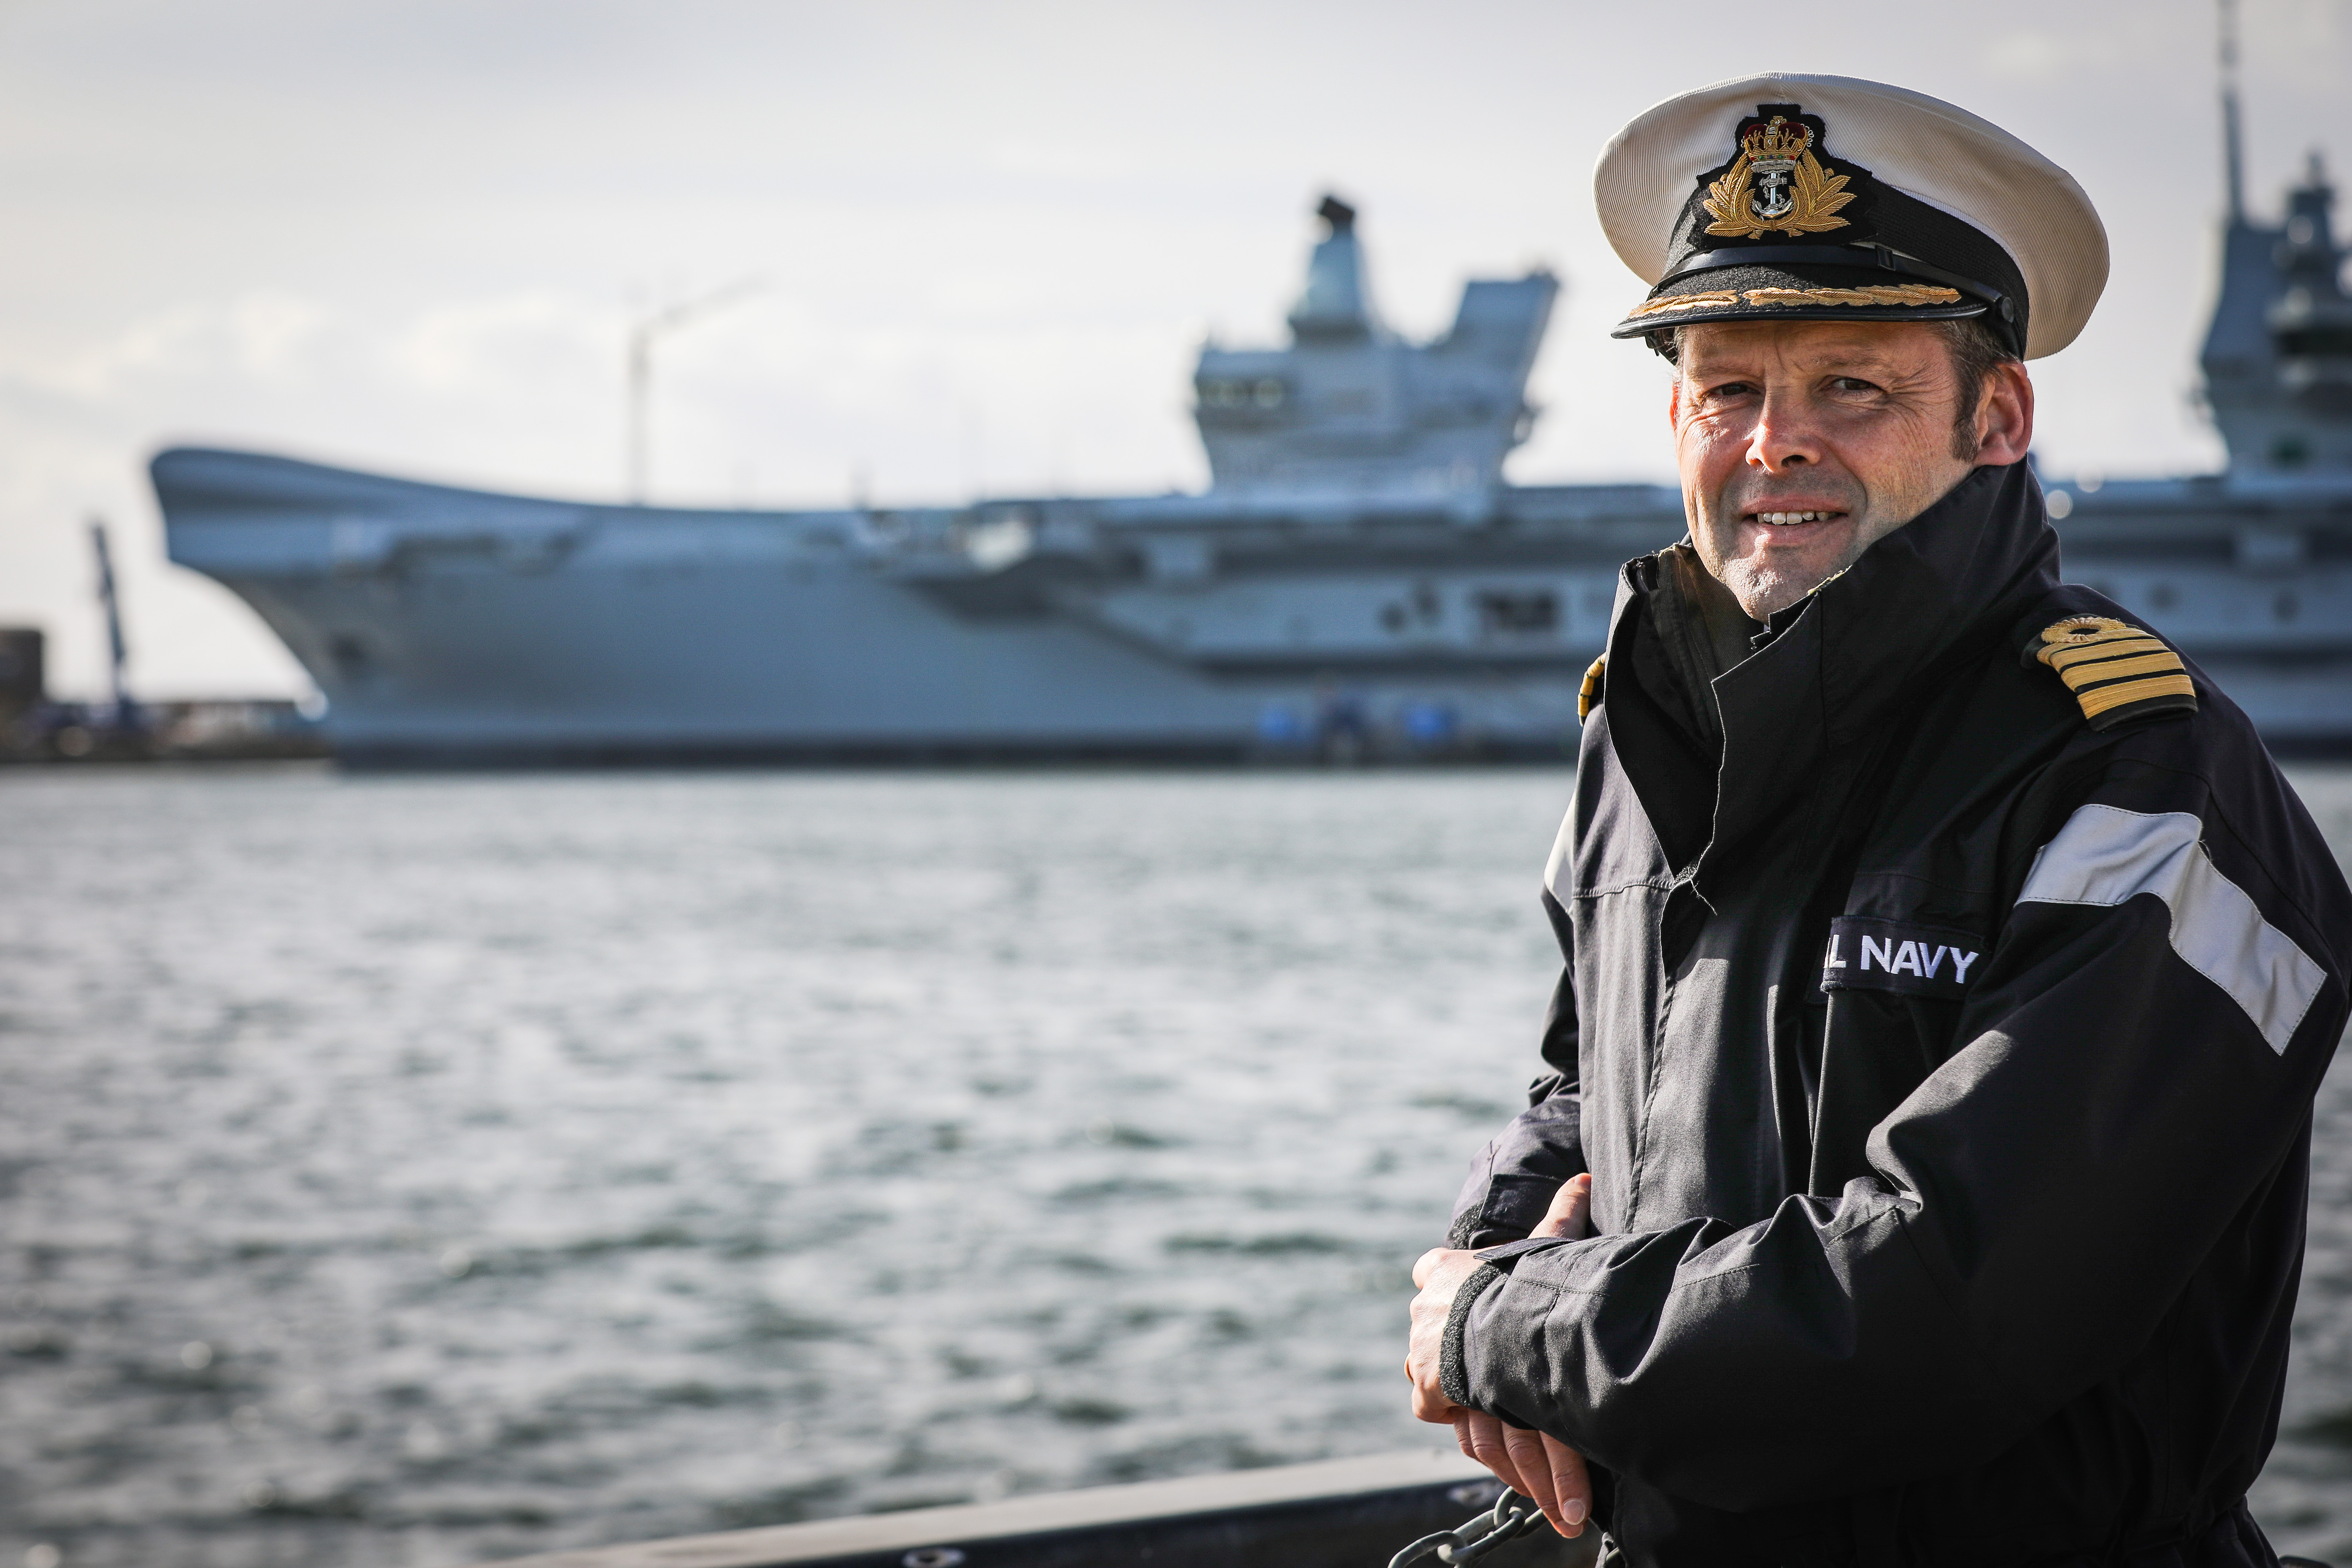 Captain Darren Houston is at the helm of aircraft carrier HMS Prince of Wales.